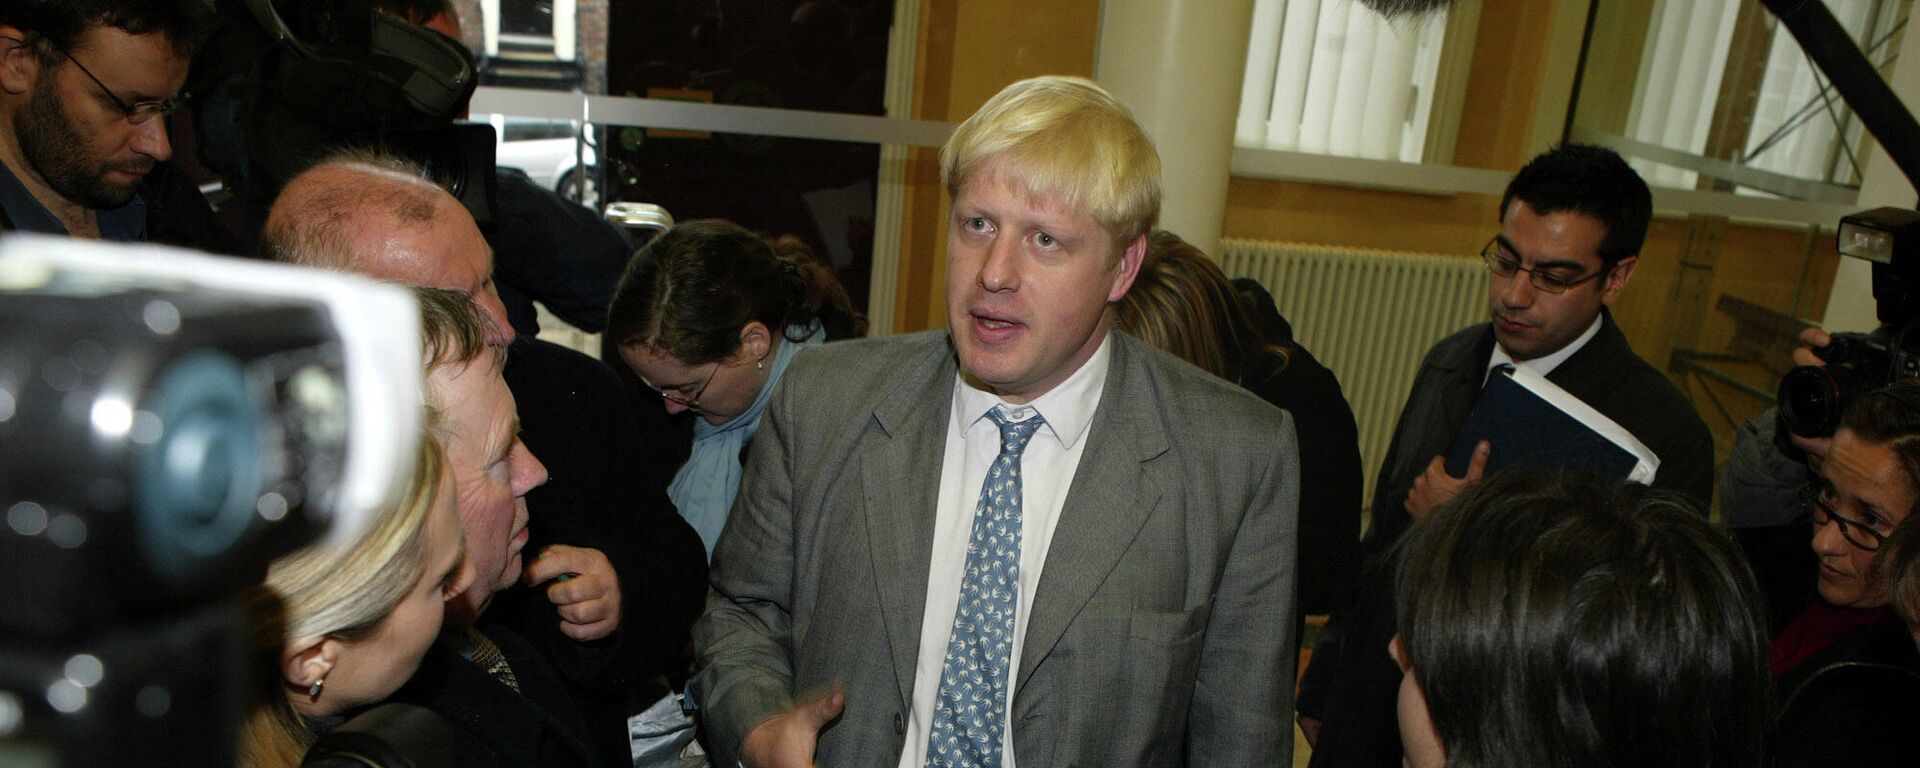 Conservative Member of Parliament and editor of The Spectator magazine, Boris Johnson arrives at the Liverpool Institute of Performing Arts in Liverpool, England, Wednesday Oct. 20 2004 - Sputnik International, 1920, 29.12.2021